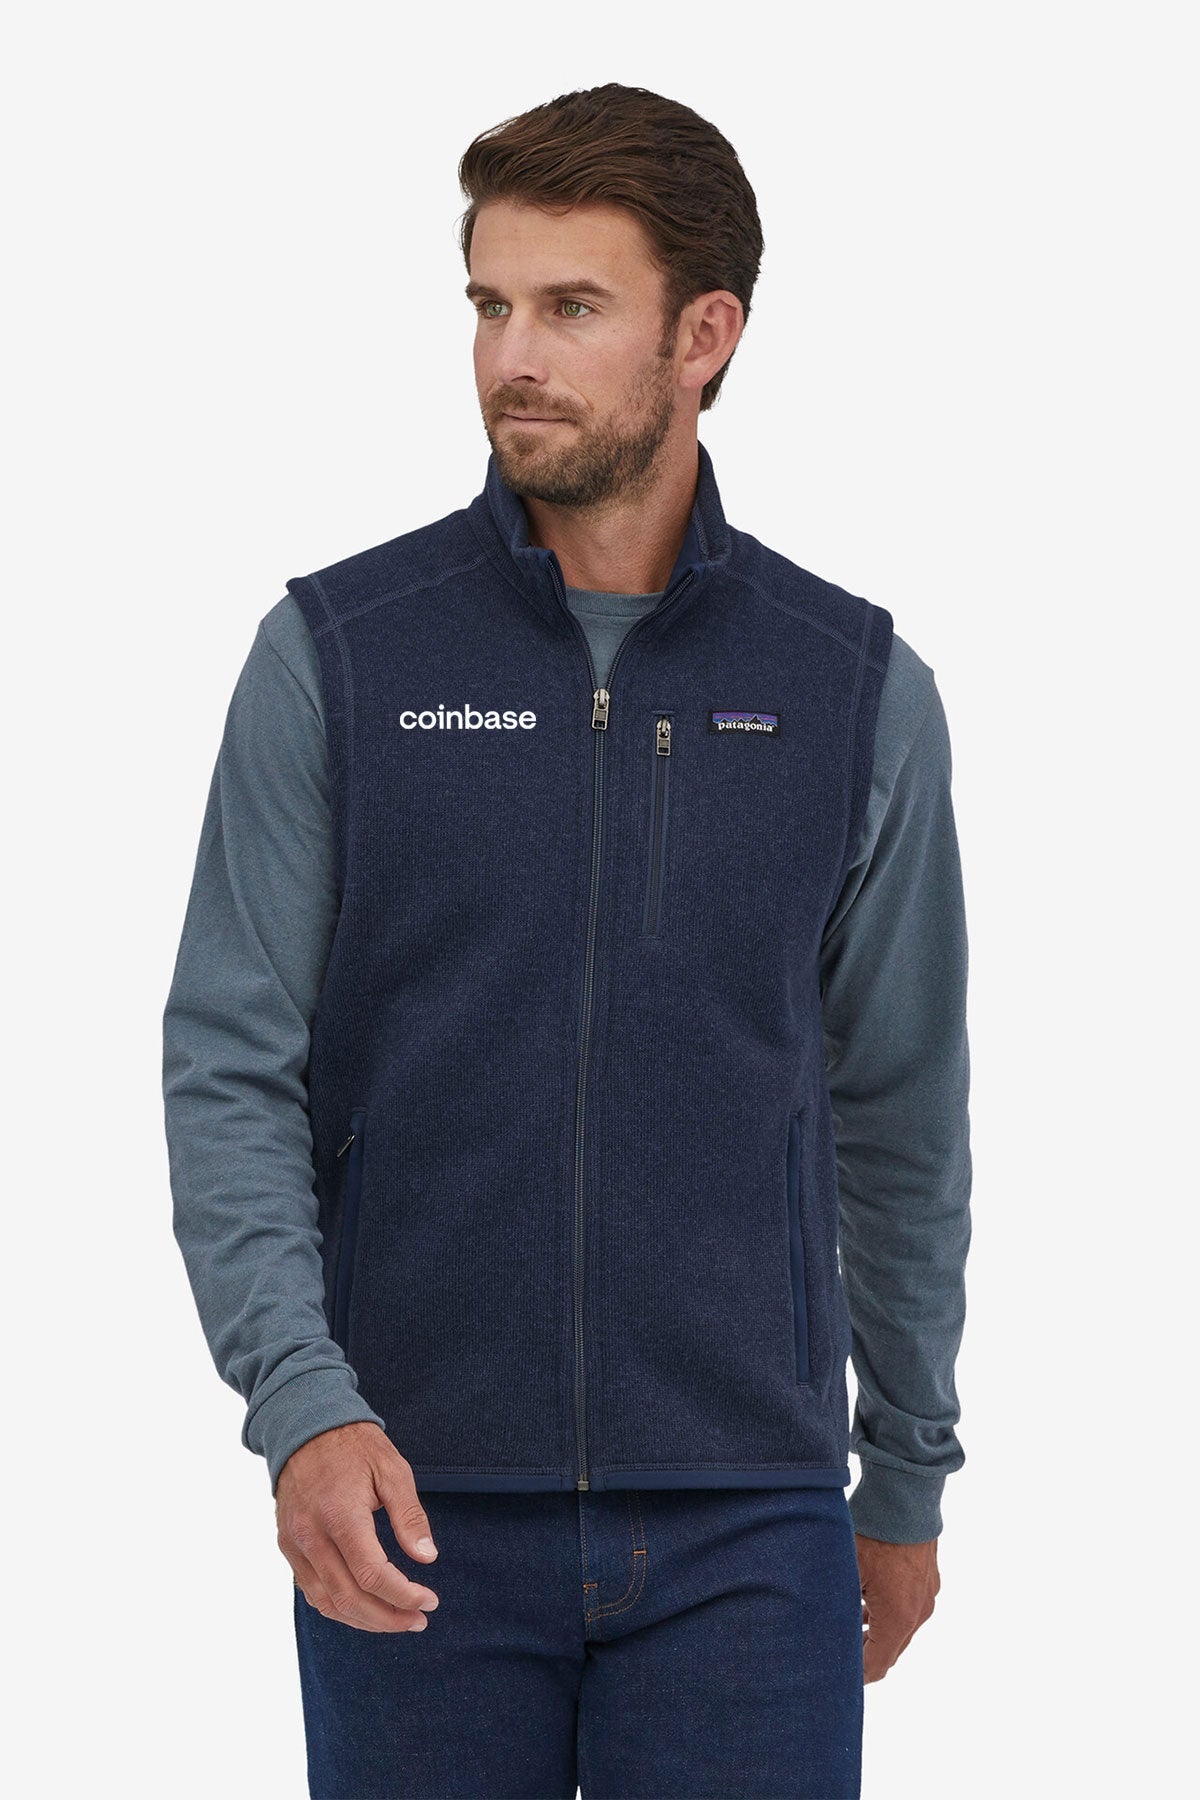 Patagonia Mens Better Sweater Fleece Customized Vests, New Navy [Coinbase]